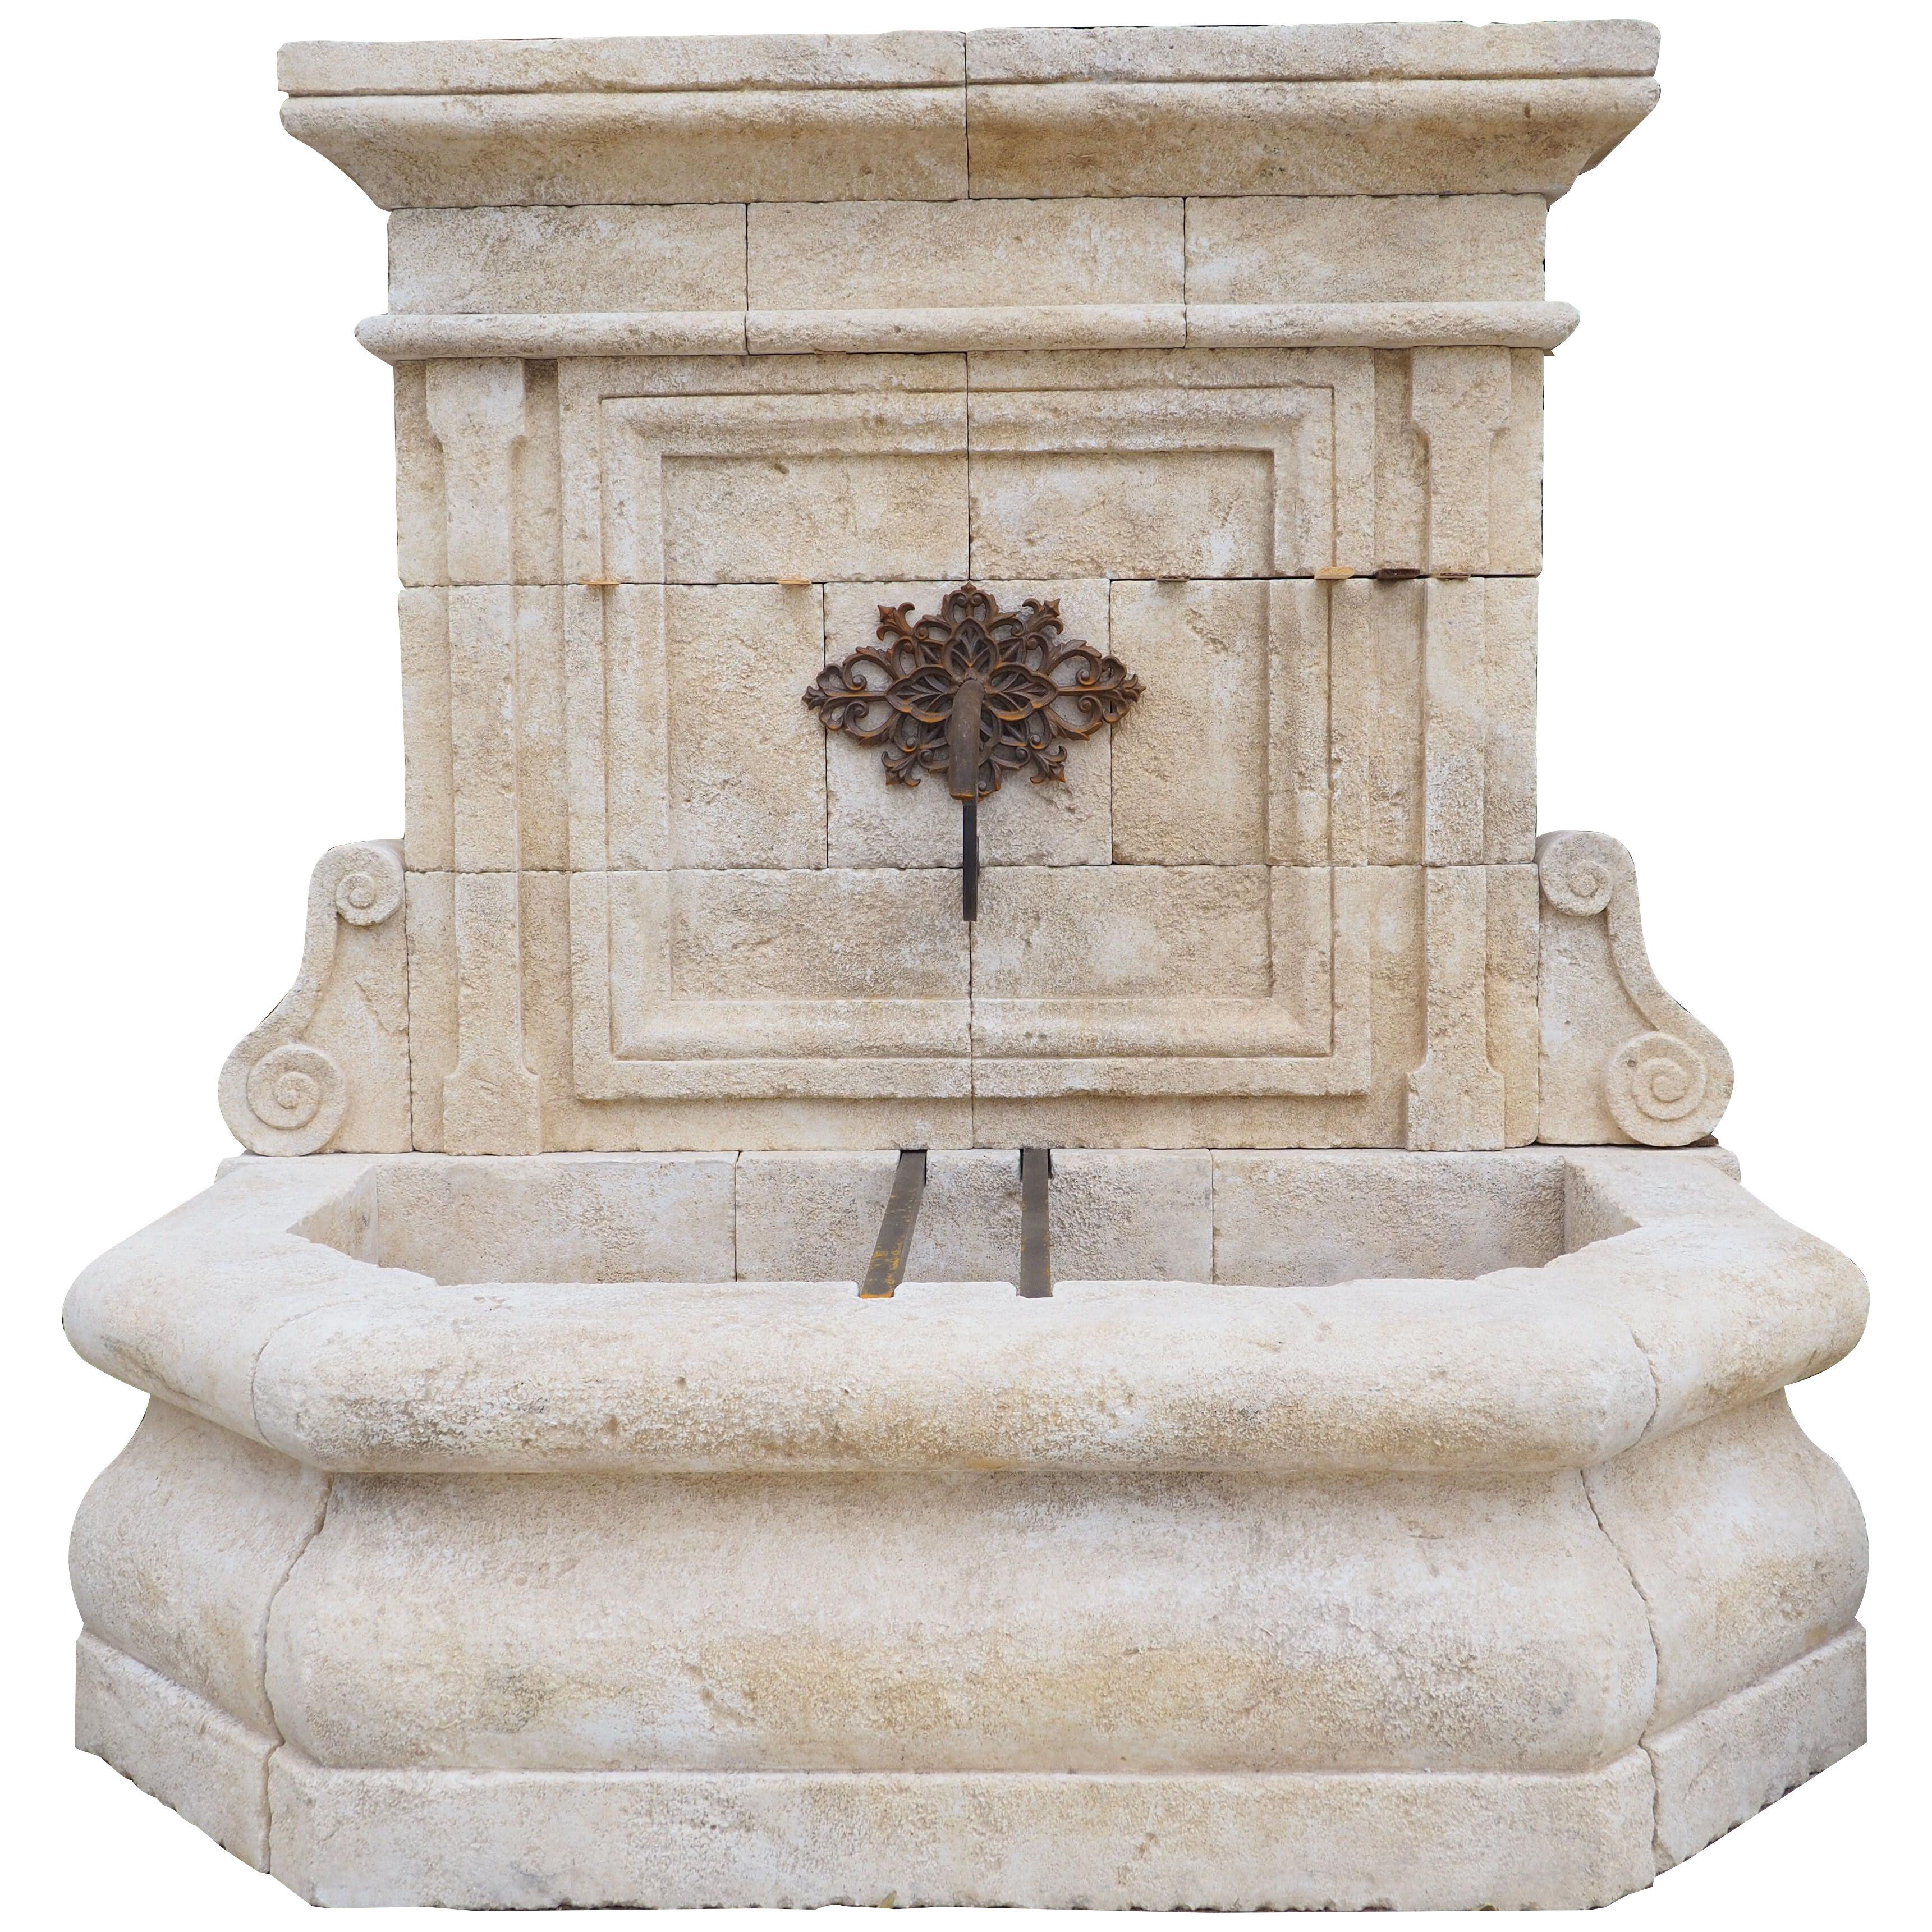 Limestone Wall Fountain from The Vaucluse, Provence France